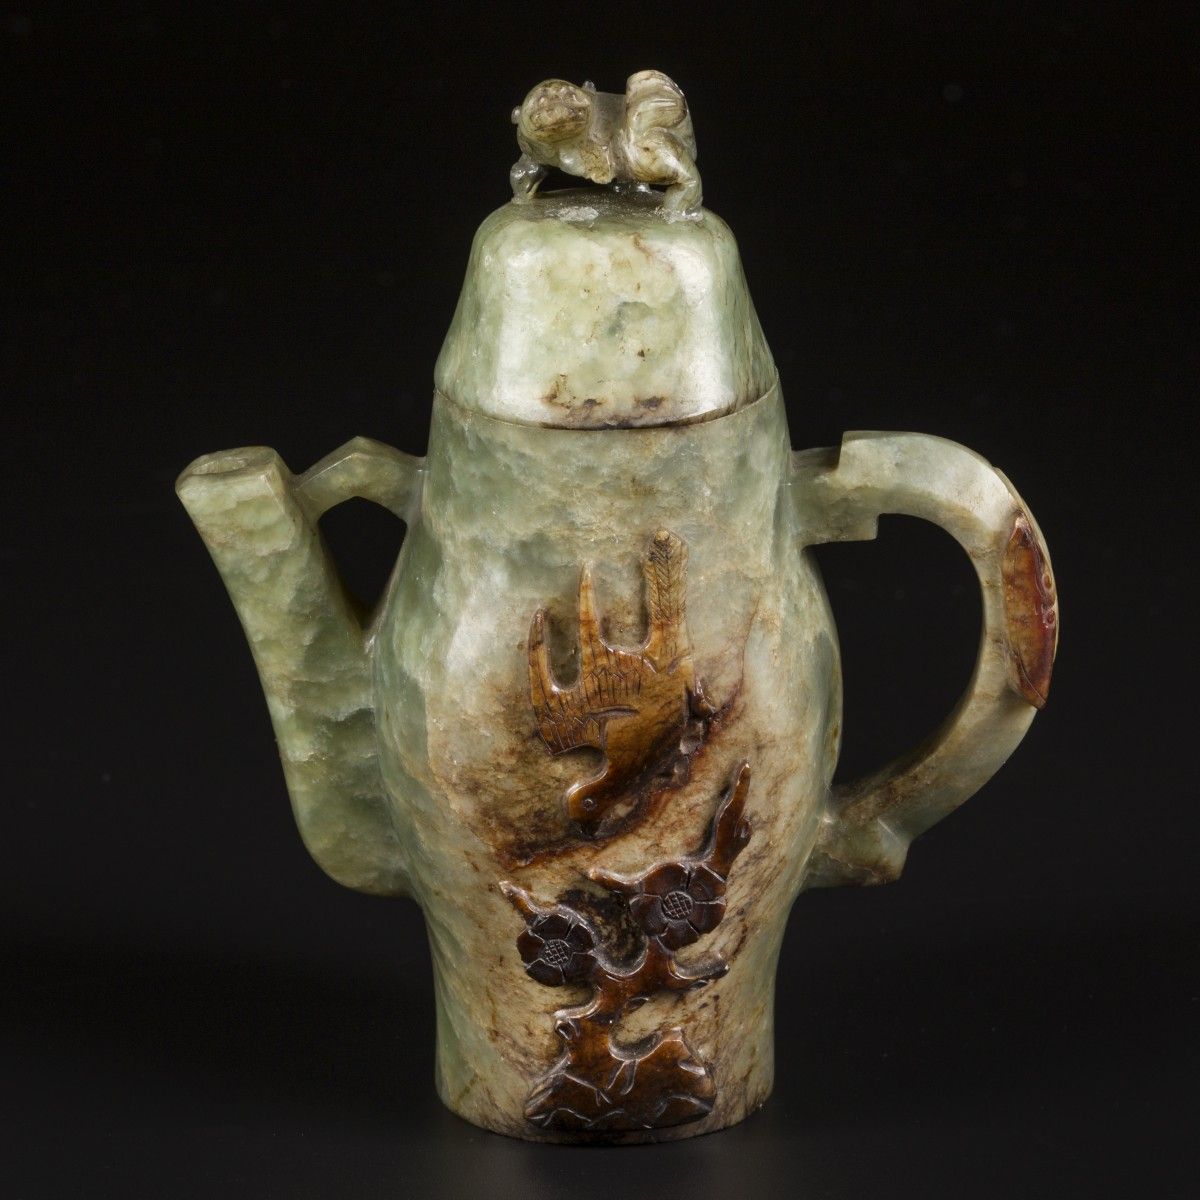 A Celadon jade teapot decorated with a lion as lid knob and relief decoration of&hellip;